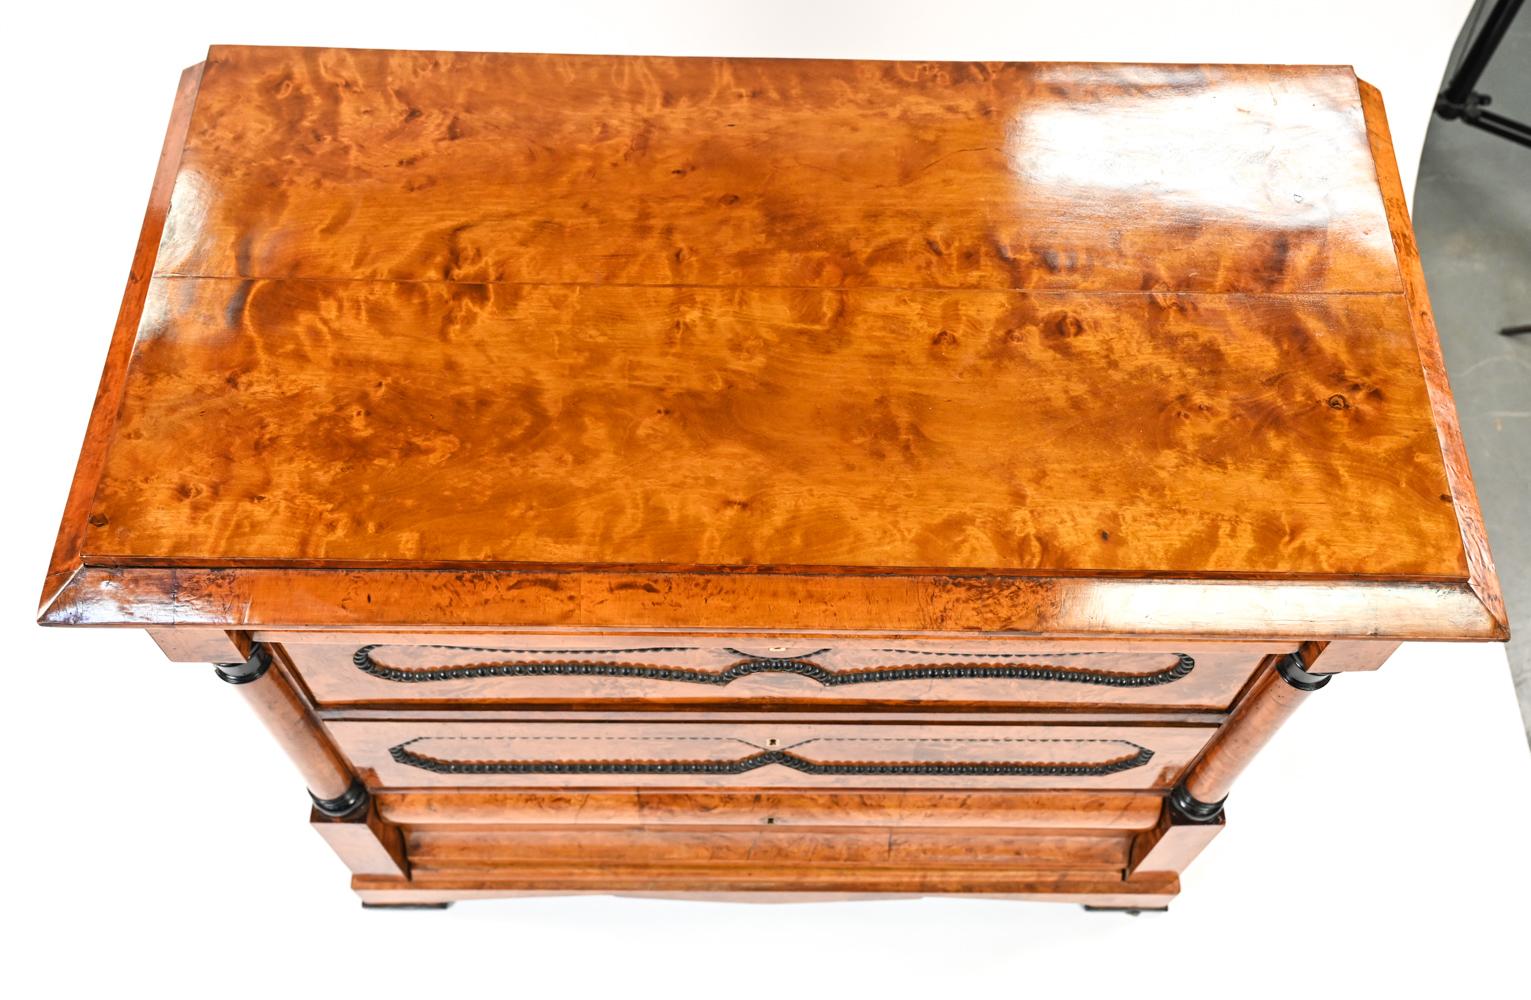 A handsome Swedish antique beechwood chest of drawers in the Biedermeier style with beautiful grain and finish, featuring ebonized and beaded details.